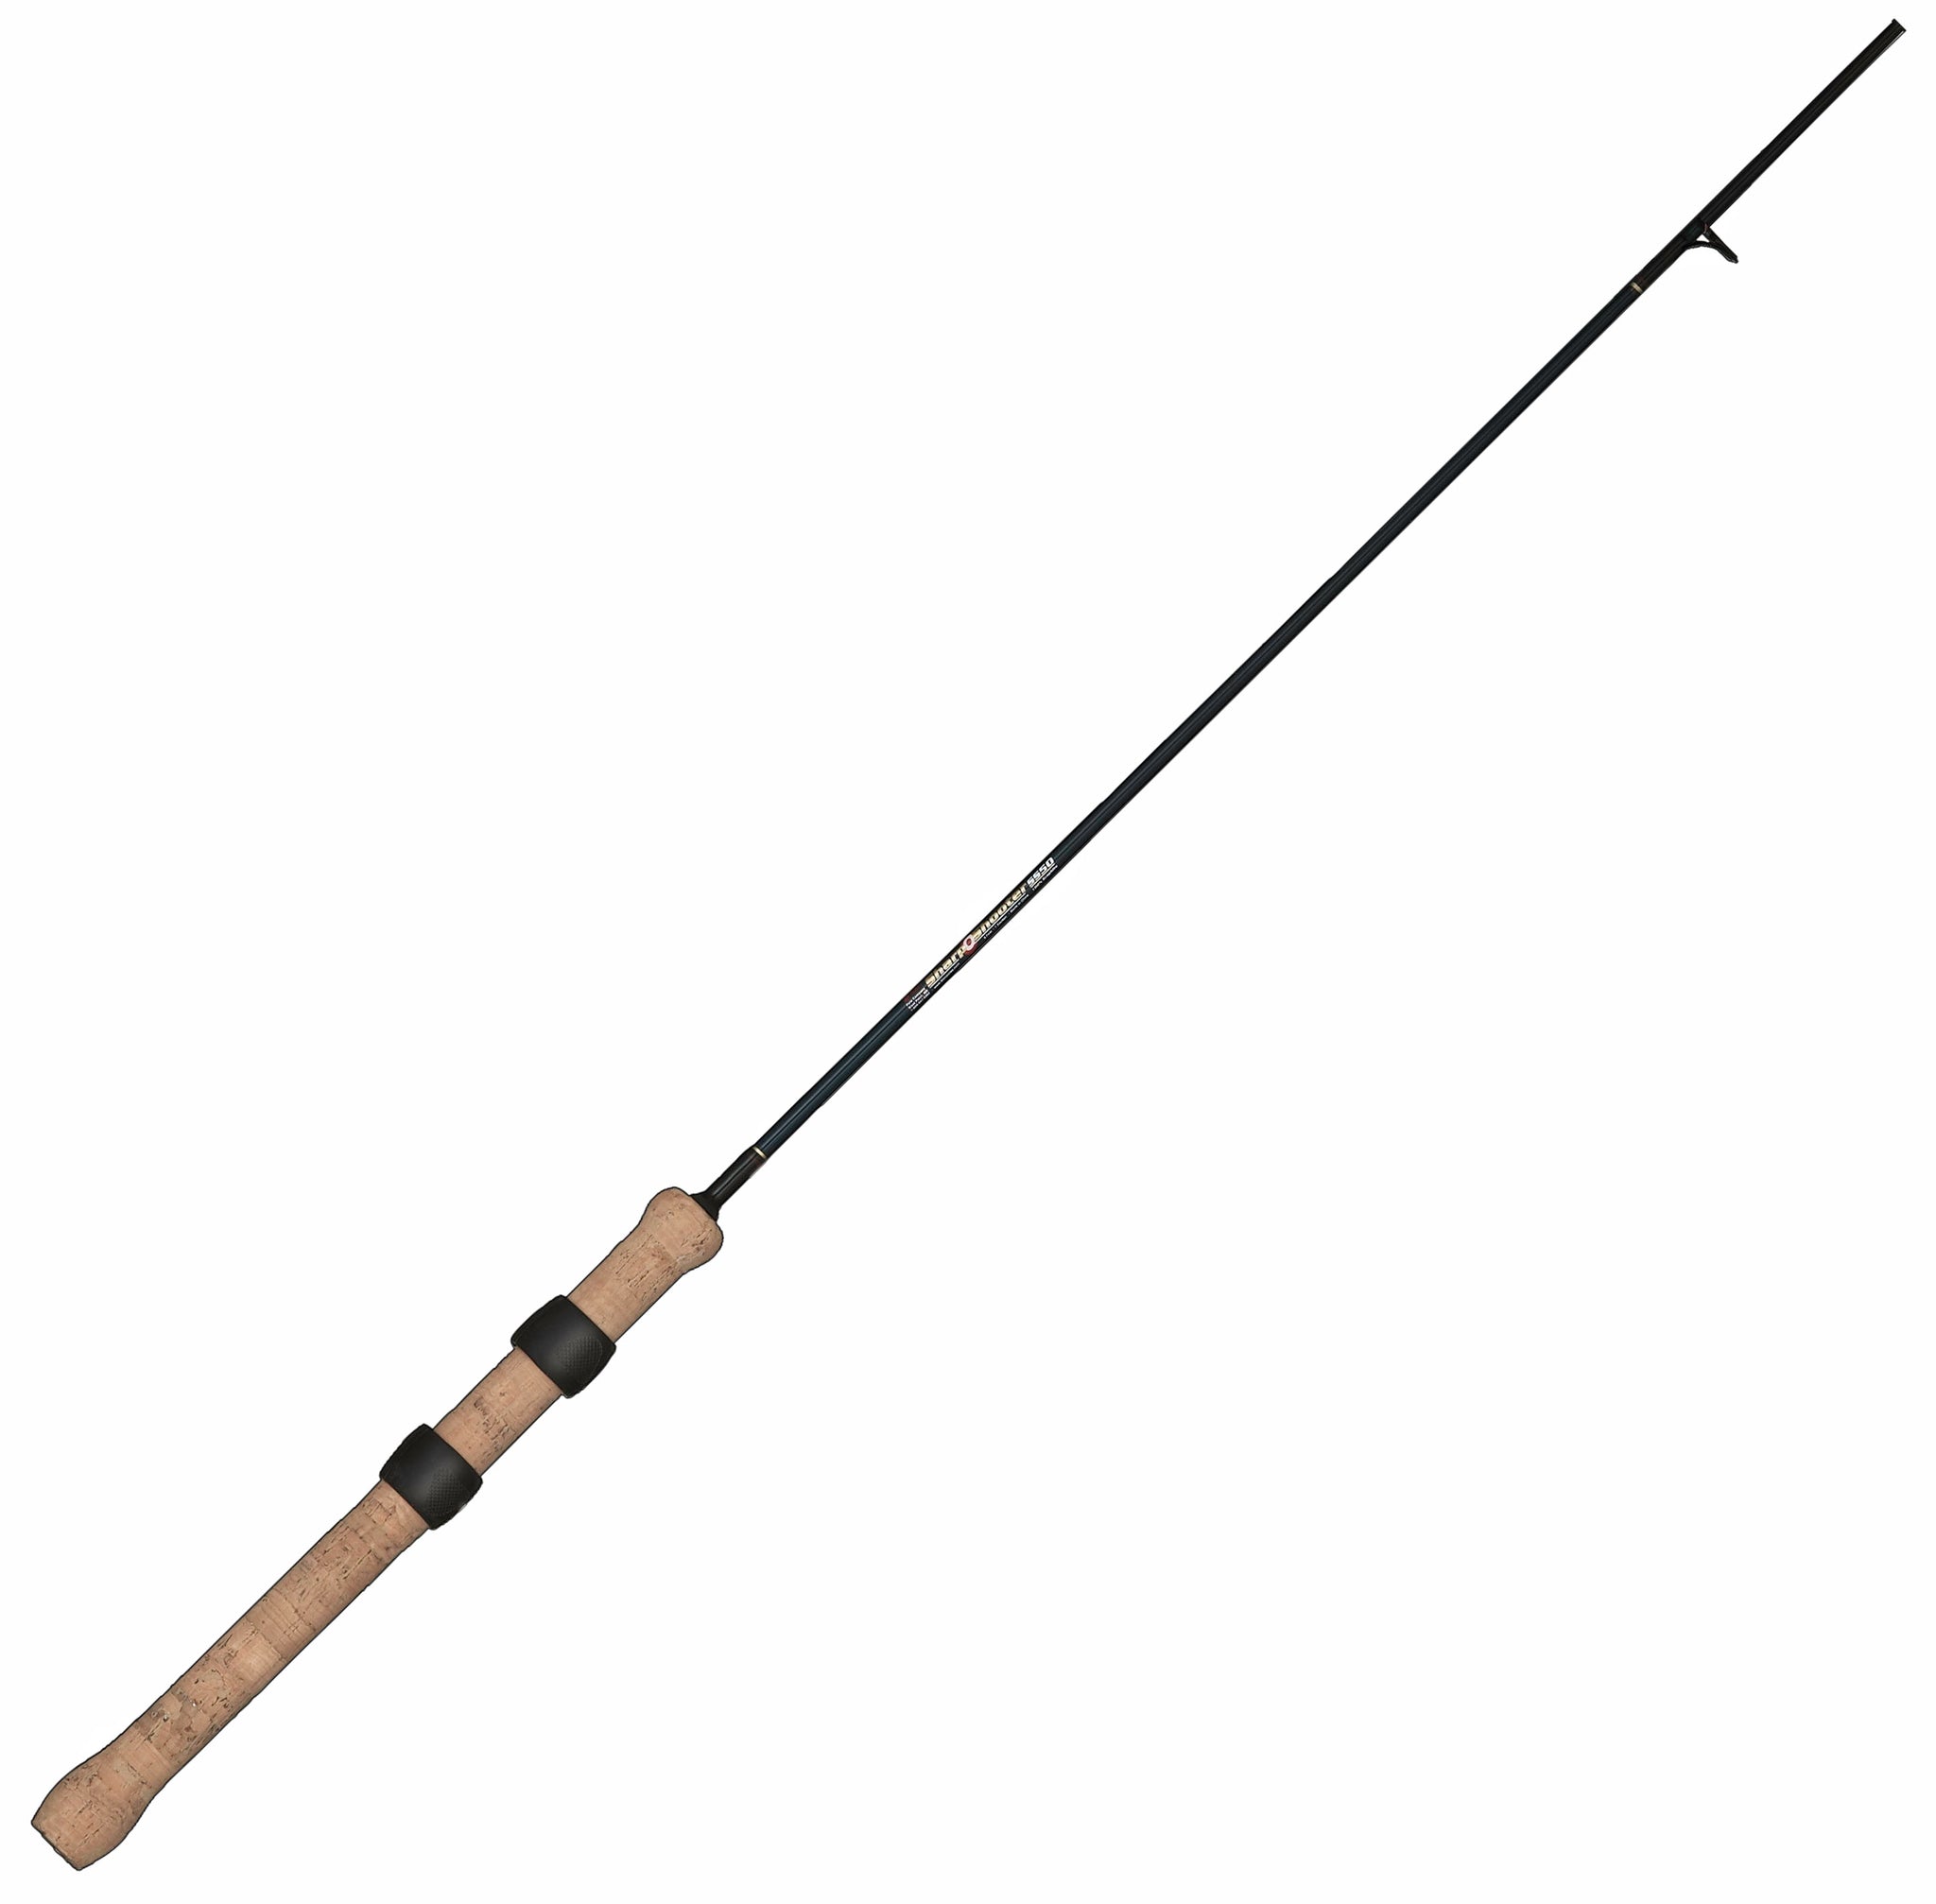 manufacture of fishing rods and reels, manufacture of fishing rods